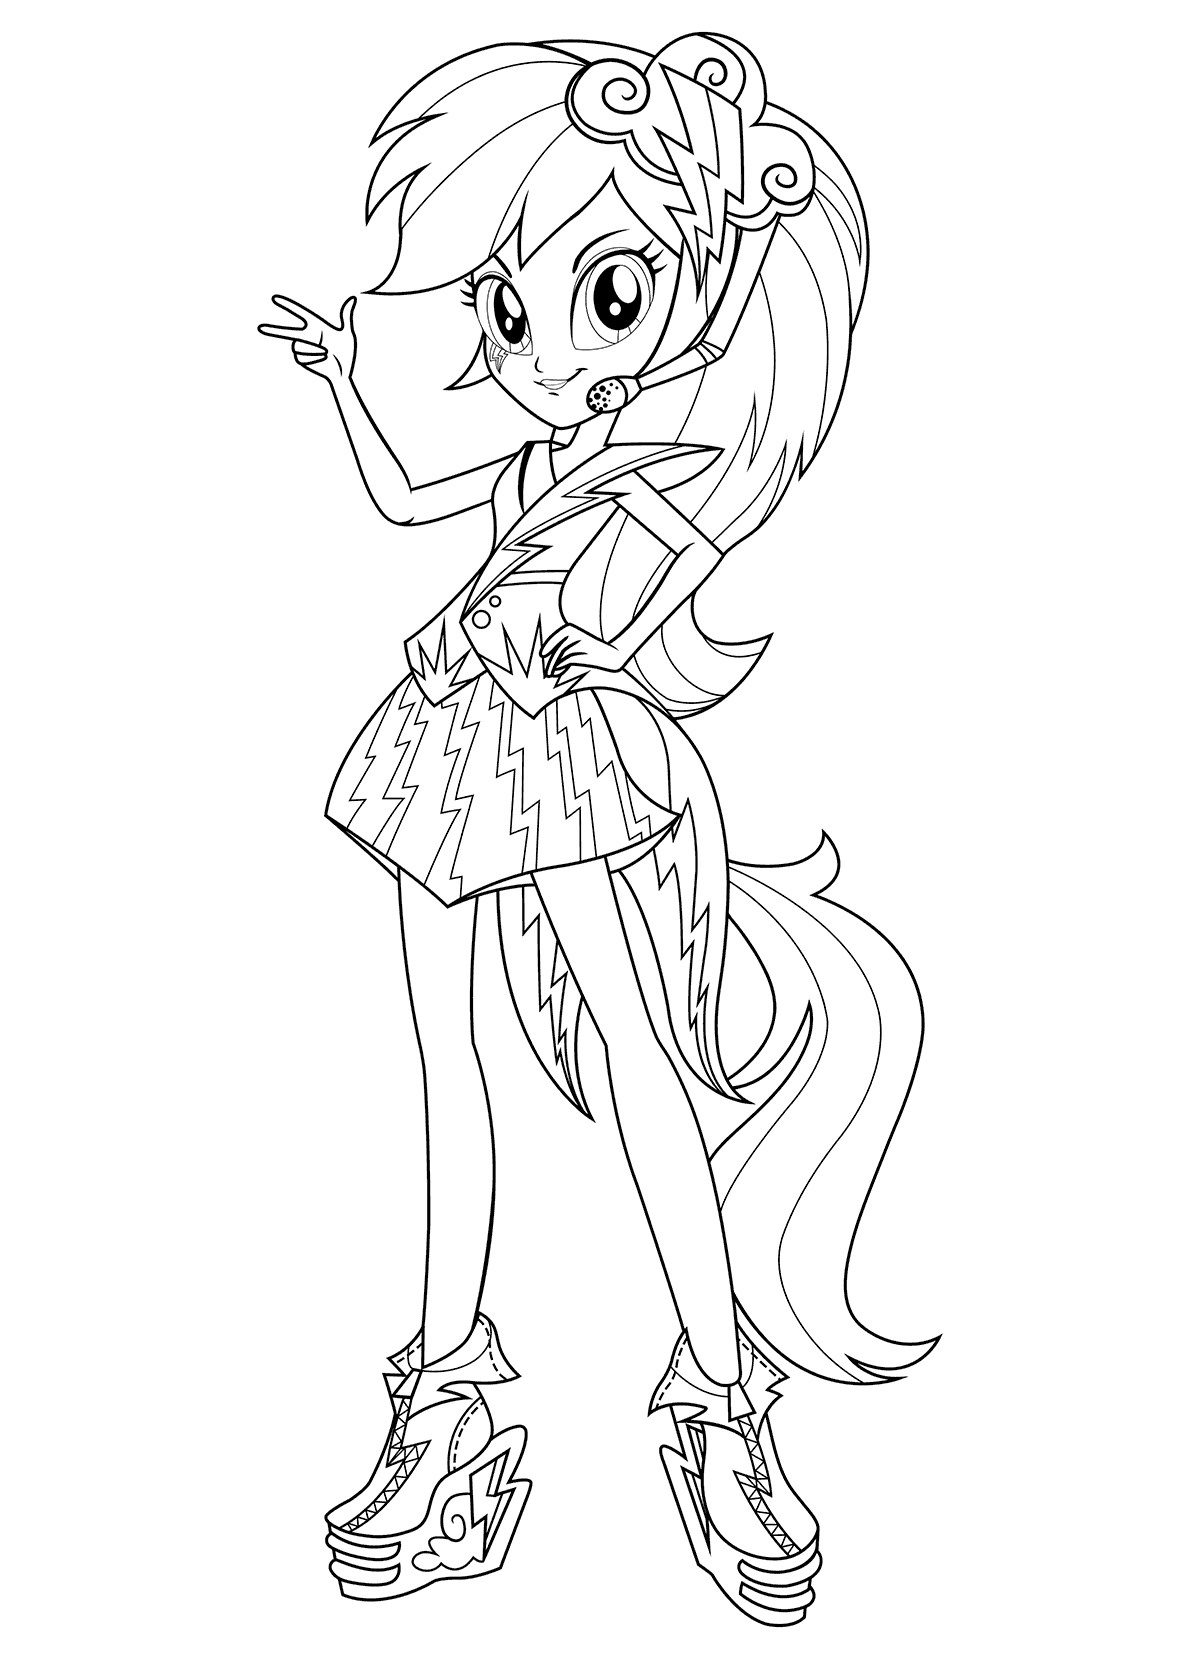 Equestria Girls Rainbow Dash Coloring Pages
 Rainbow Rocks Coloring Pages at GetColorings